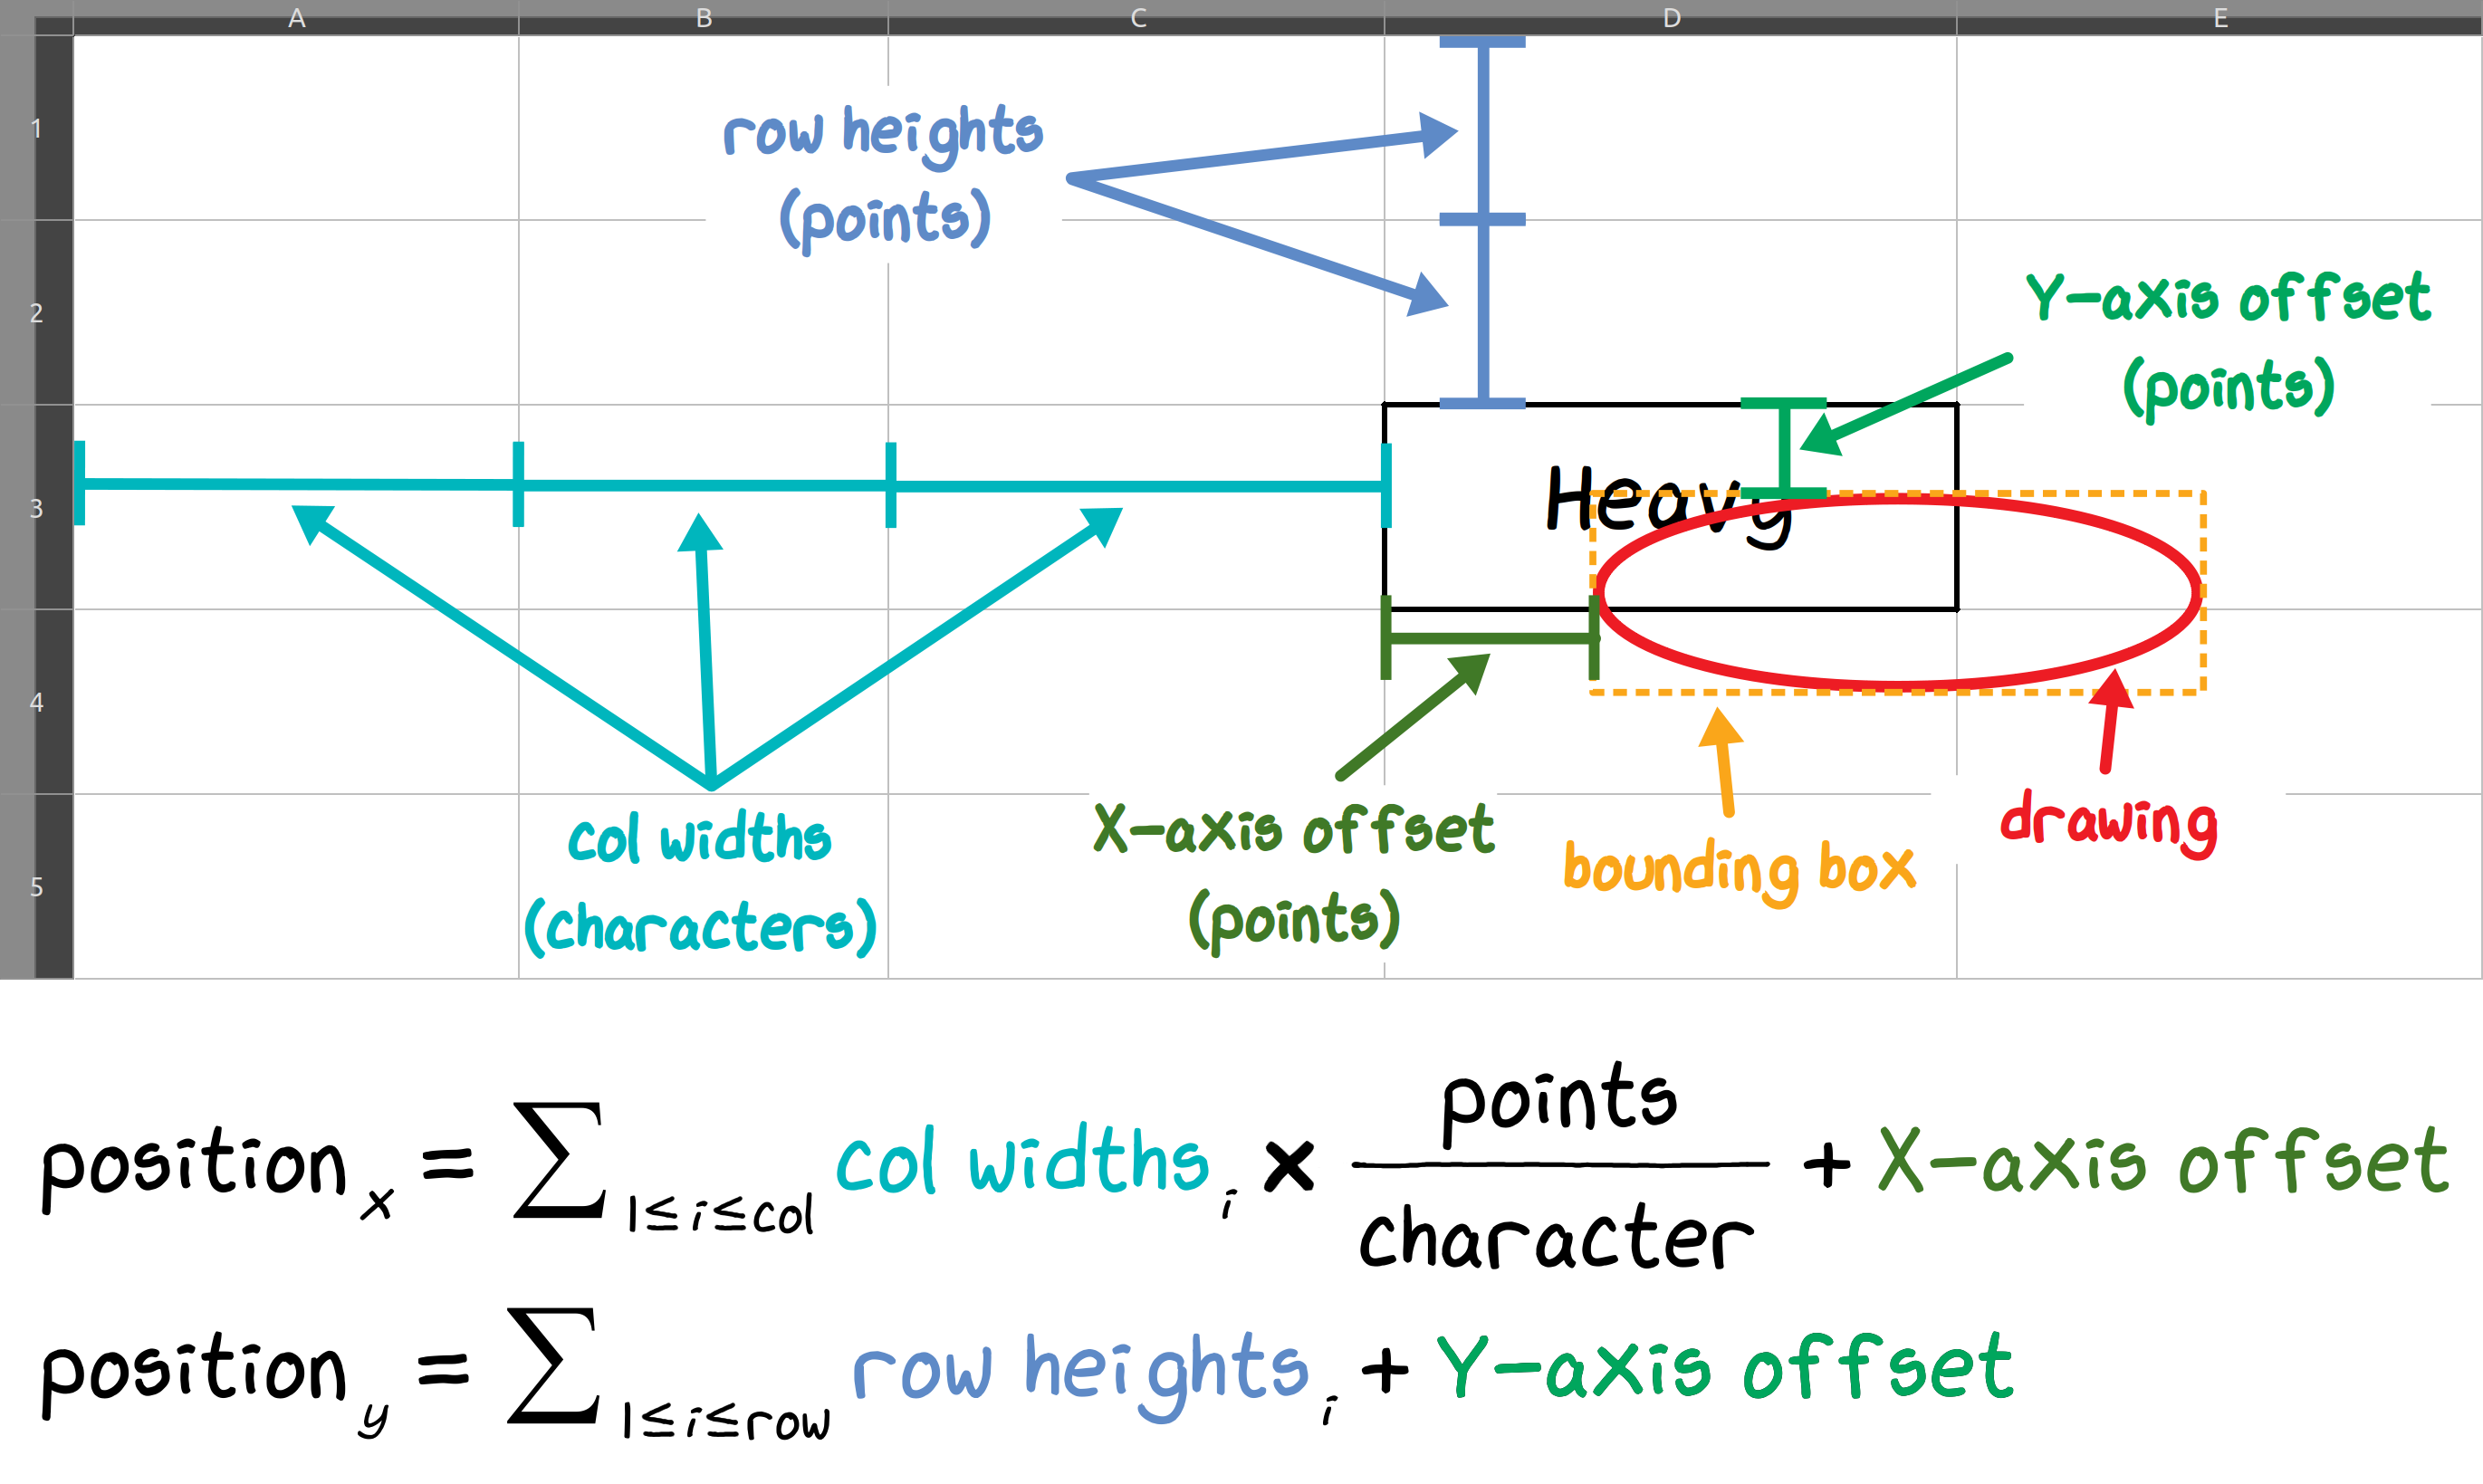 Diagram explaining Excel's row/column plus offset coordinate system, used for drawings